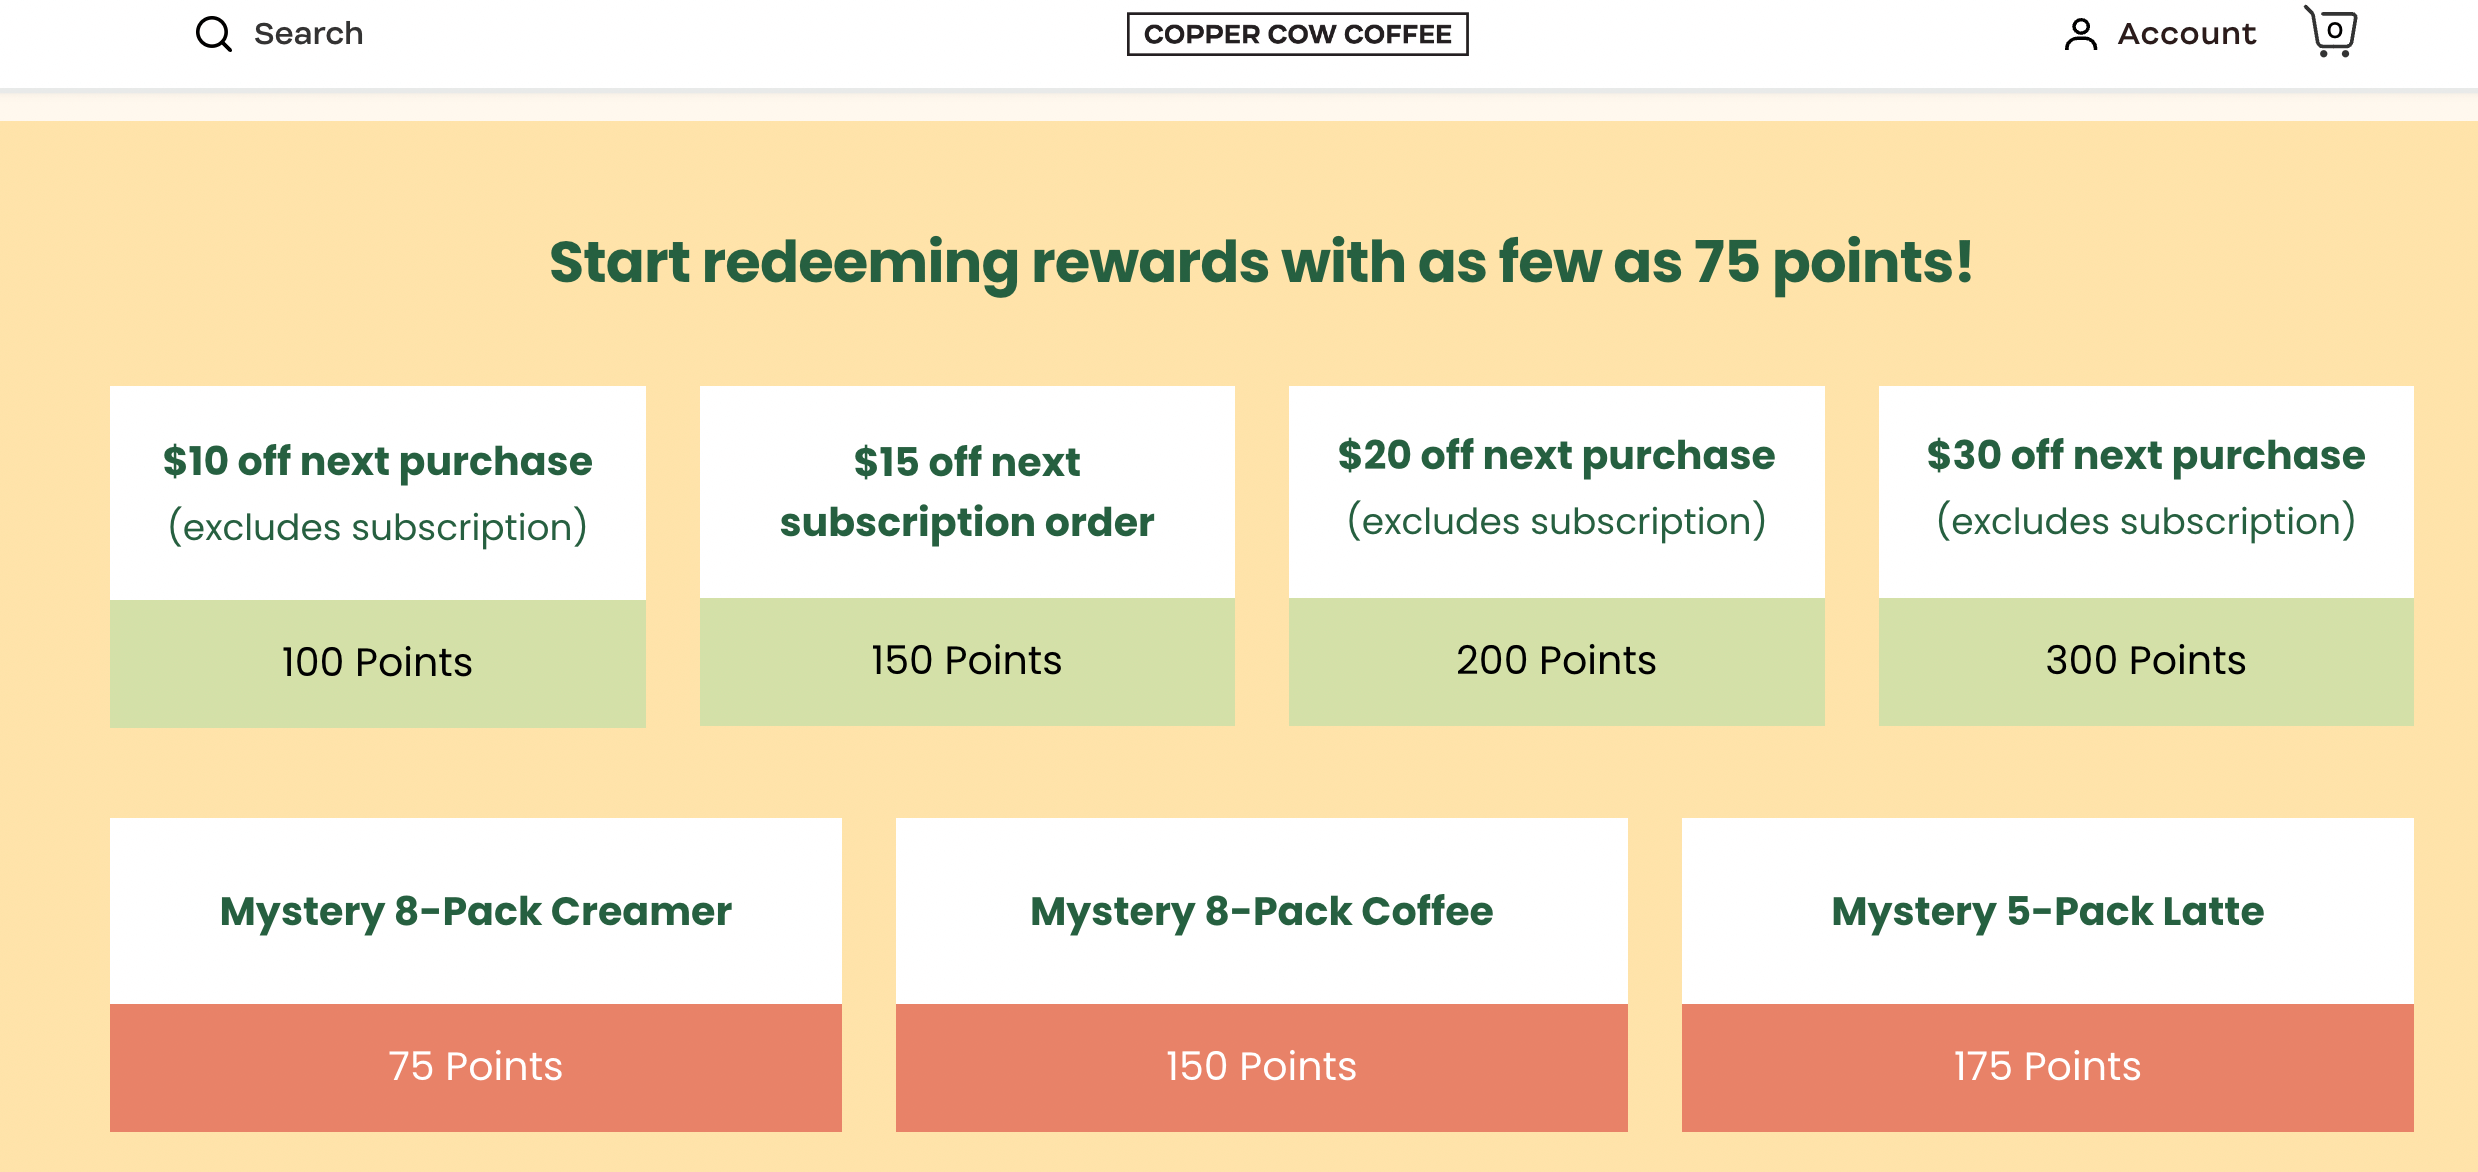 How to use a Loyalty Program as an Event-Based Marketing Tool screenshot of copper cow coffee loyalty program